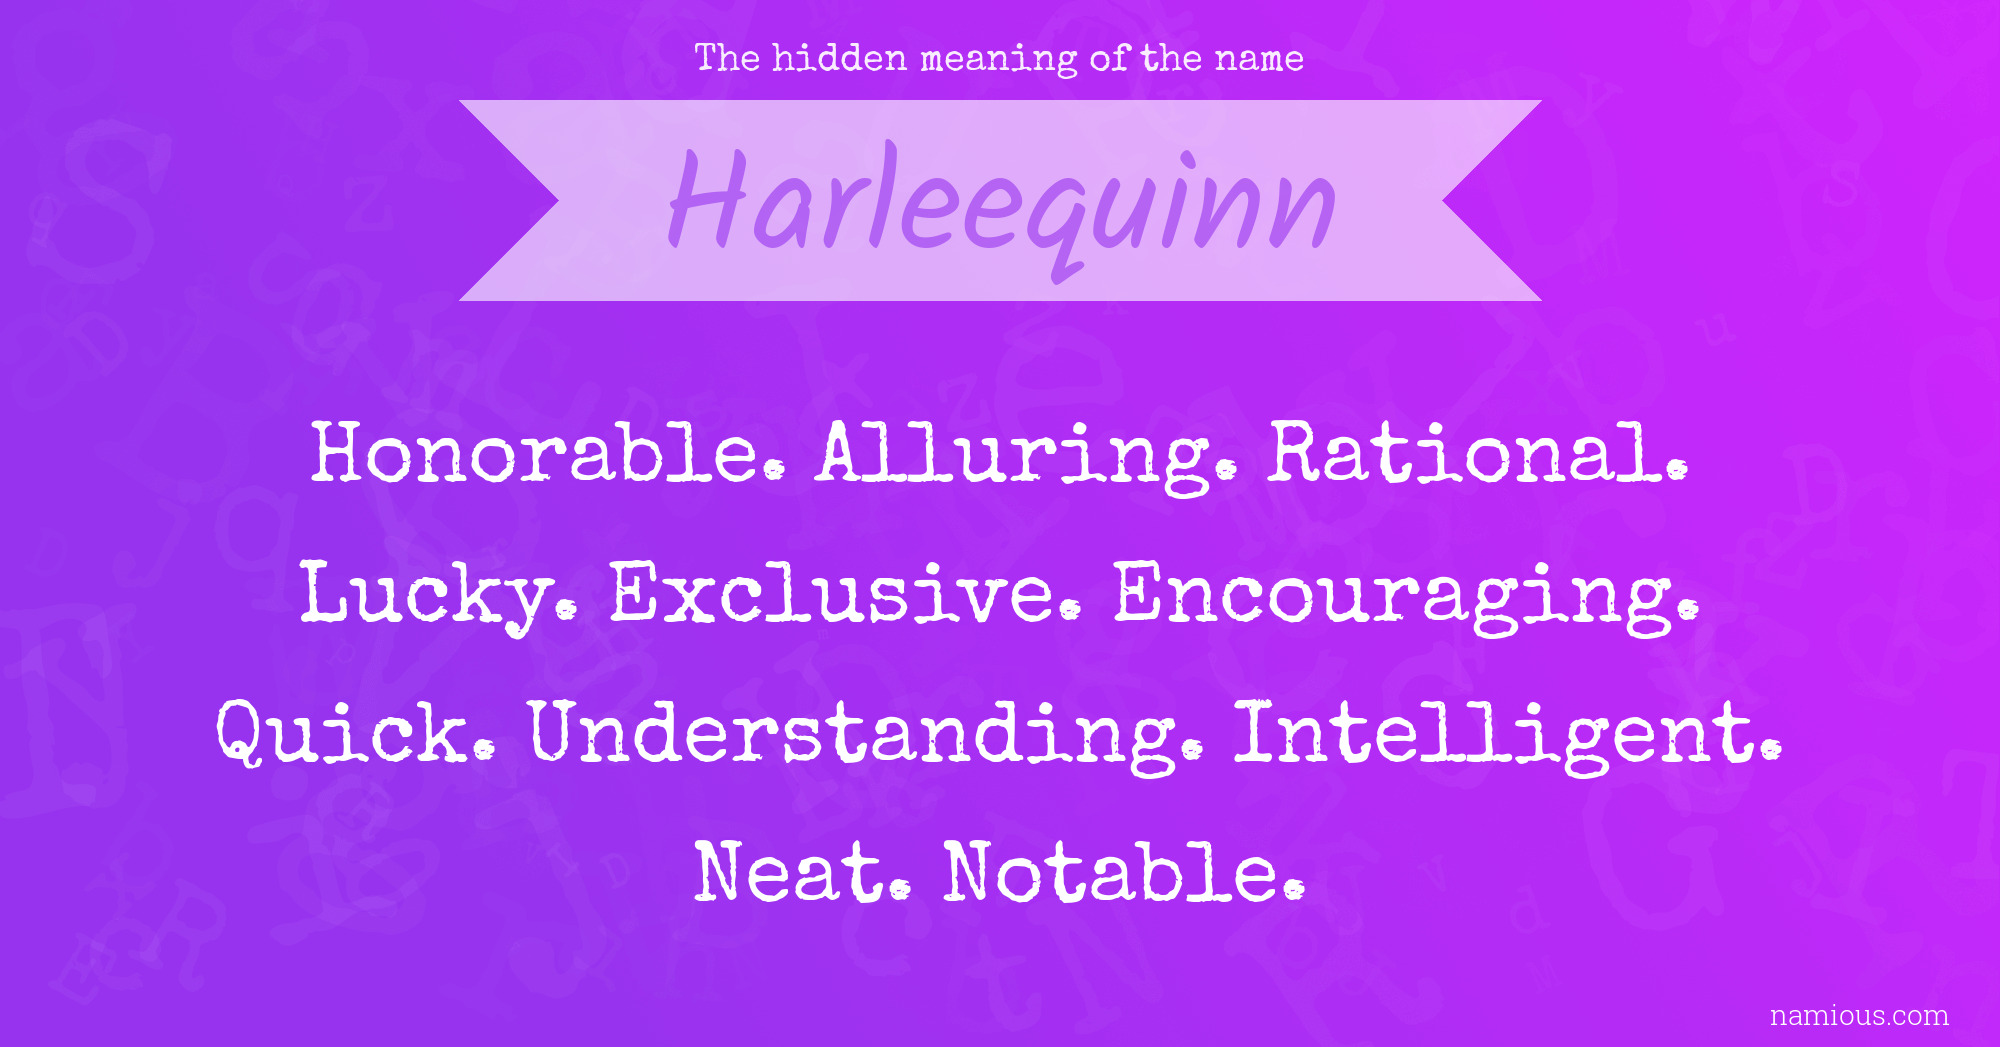 The hidden meaning of the name Harleequinn